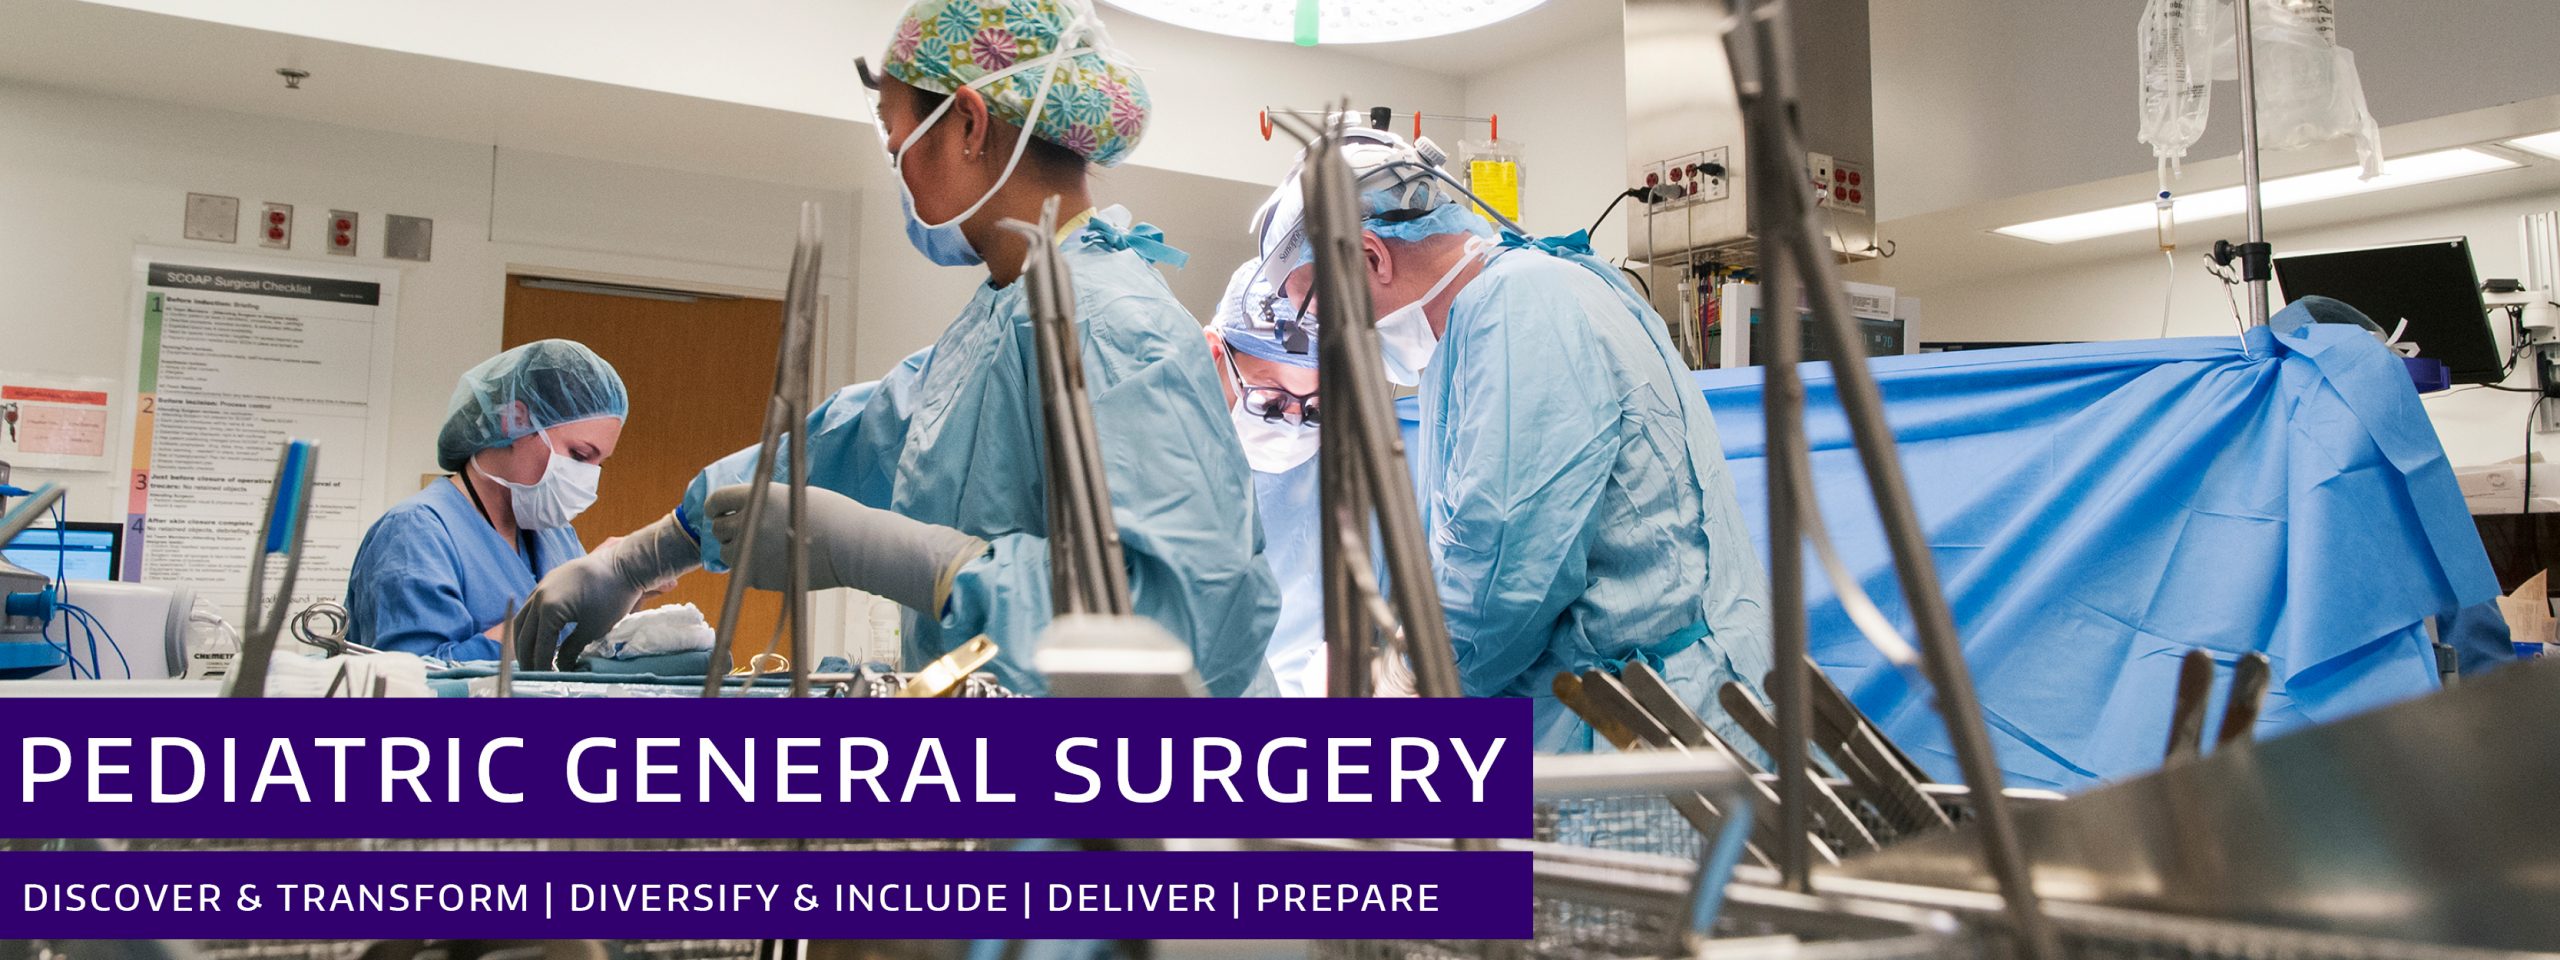 Department of Surgery Division of Pediatric General Surgery Header Image